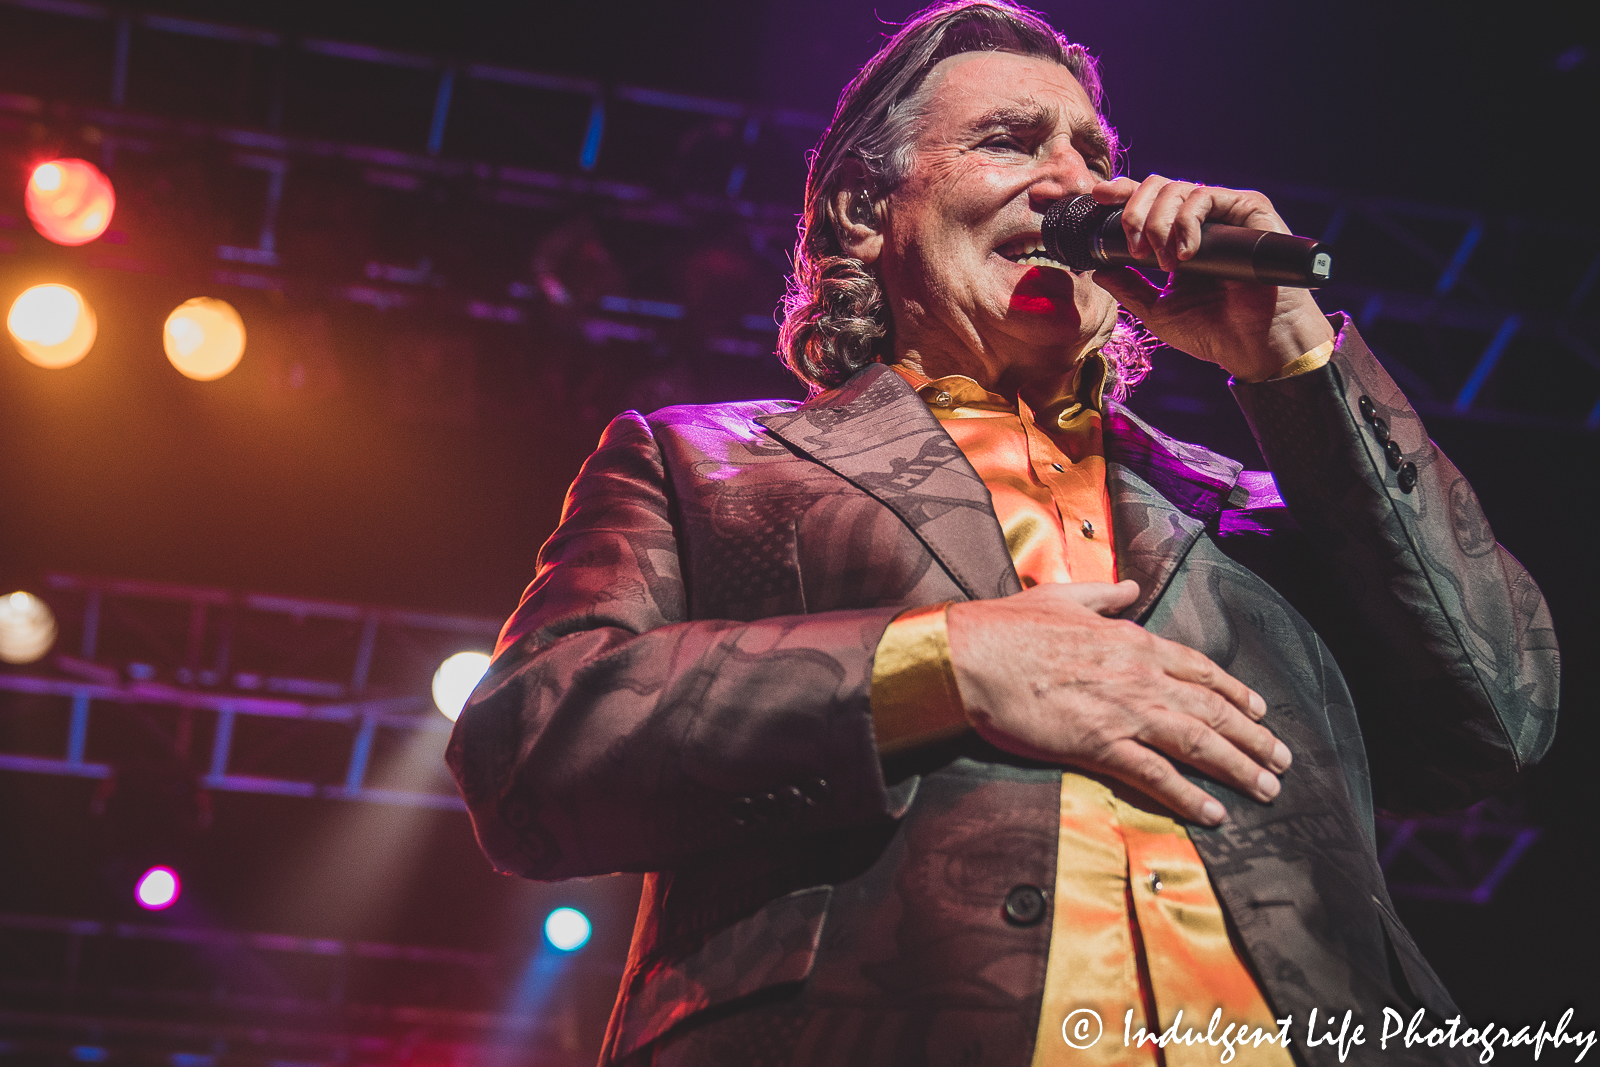 Bass singer Richard Sterban of country and gospel music group The Oak Ridge Boys live in concert at Ameristar Casino in Kansas City, MO on September 24, 2021.